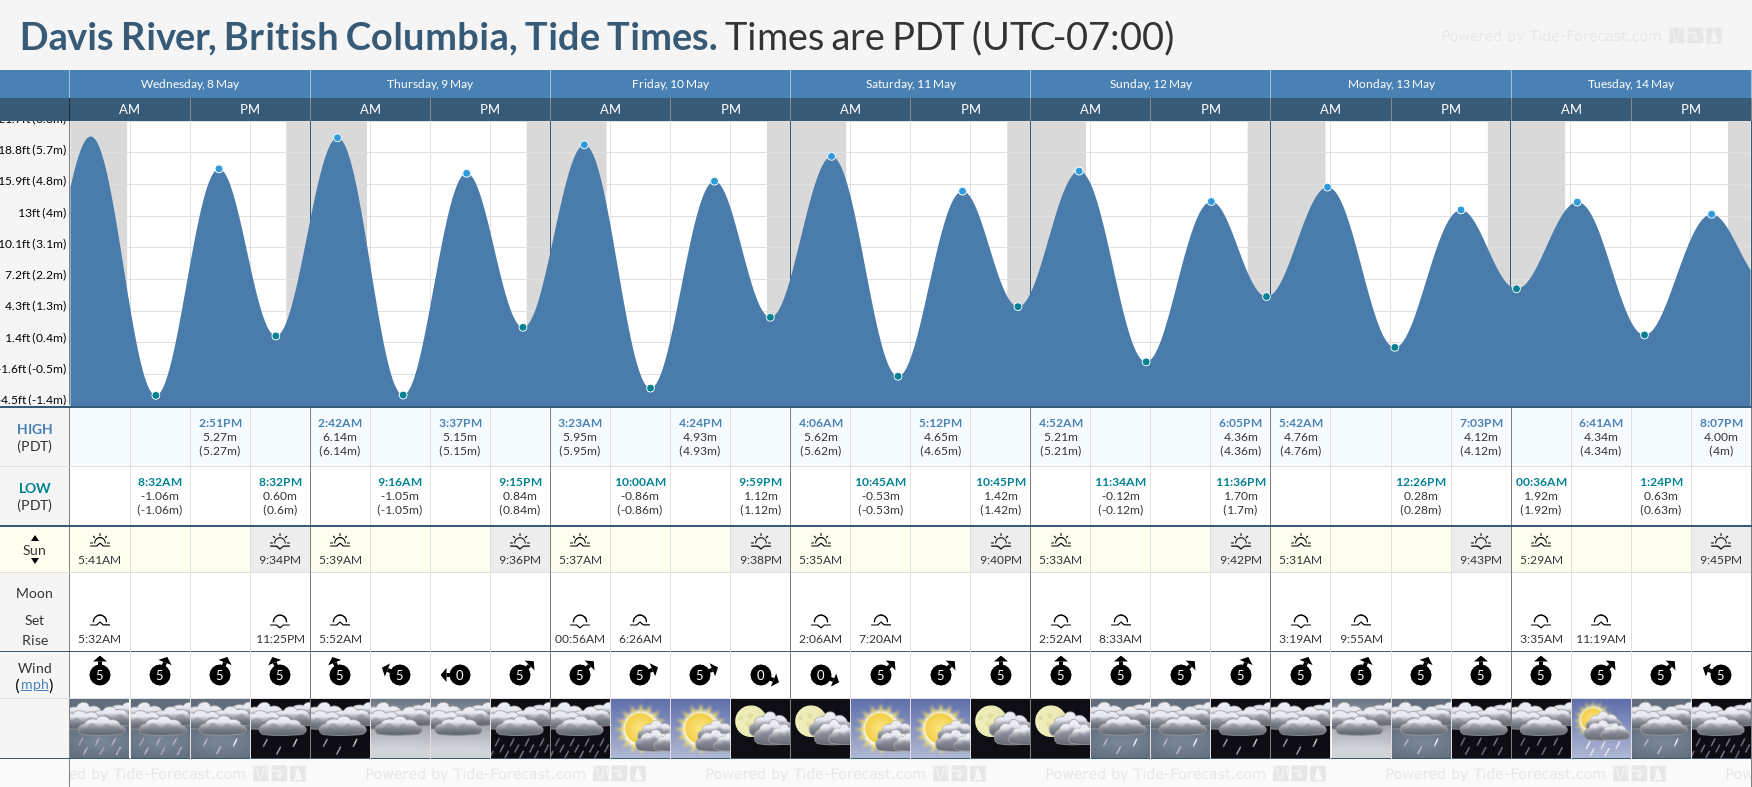 Davis River, British Columbia Tide Chart including high and low tide tide times for the next 7 days